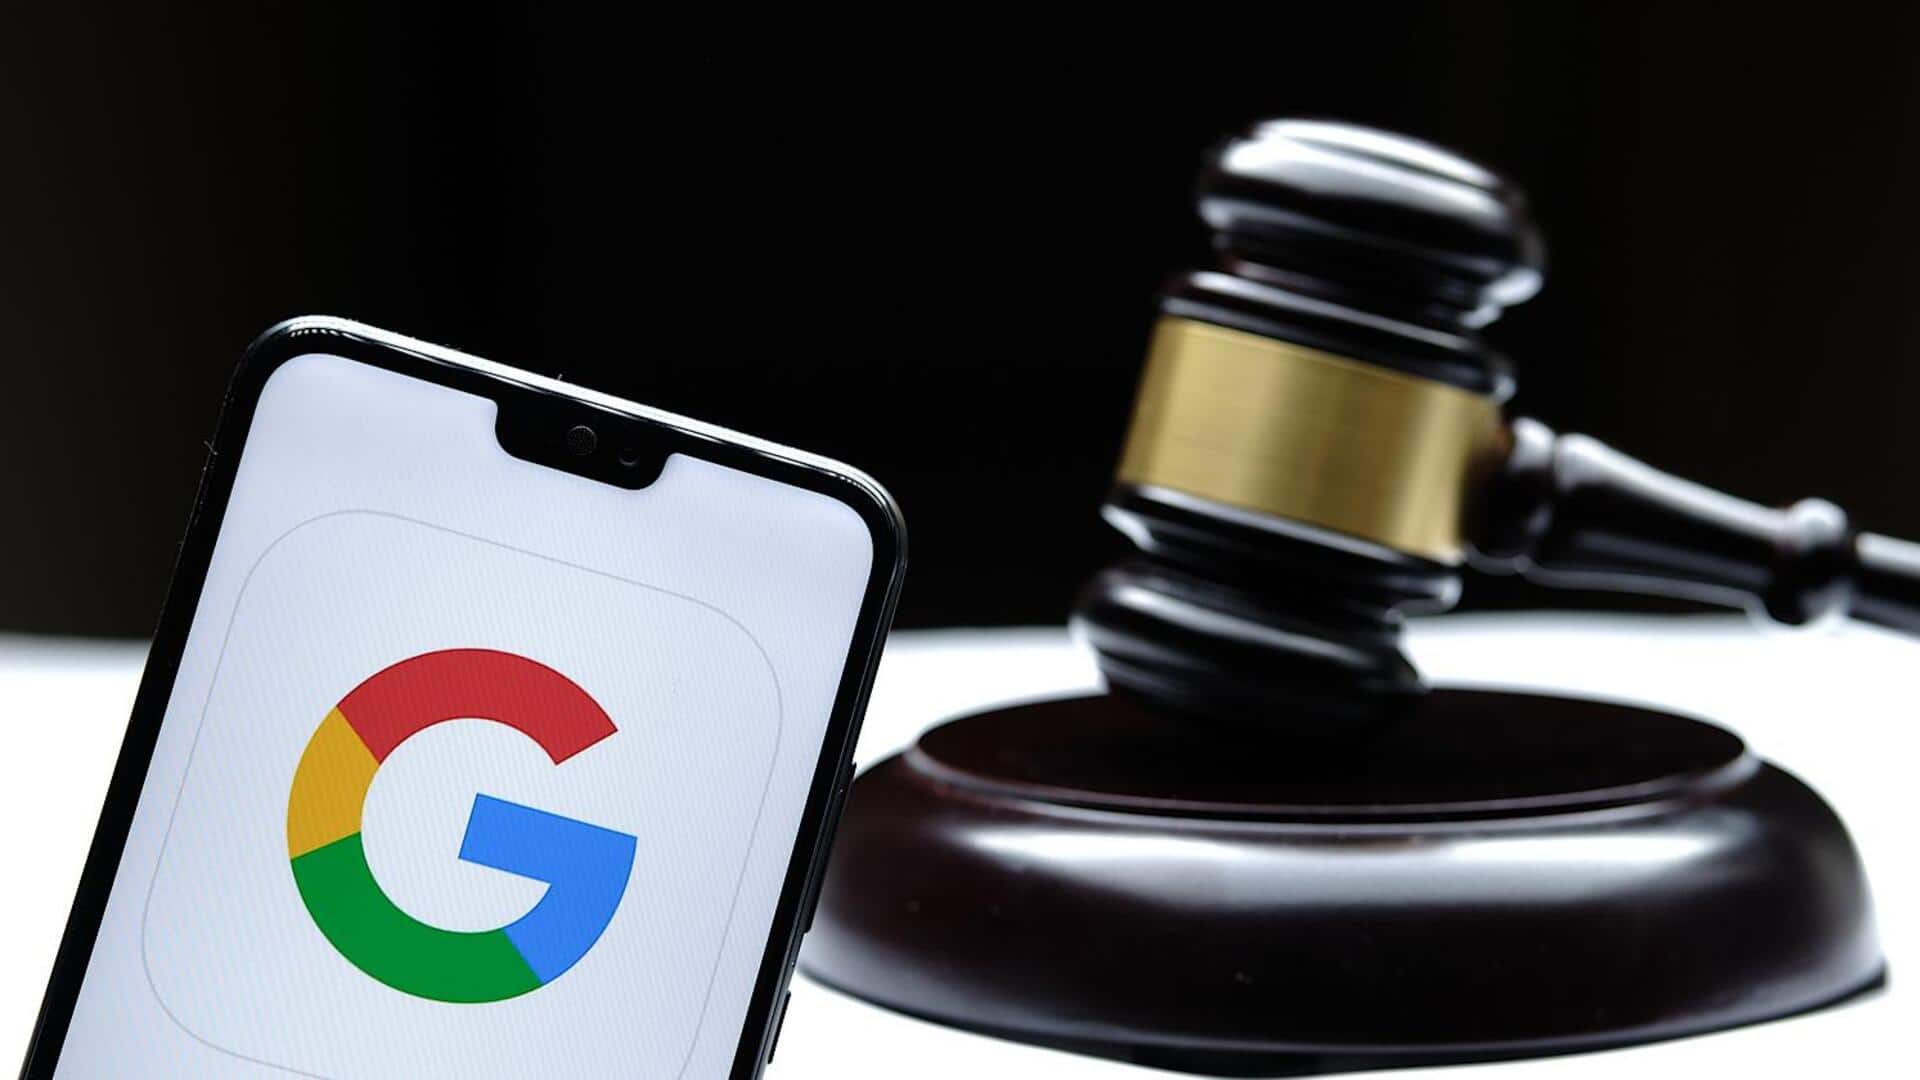 Google's antitrust trial reveals 'anti-competitive' deals with Apple and Samsung